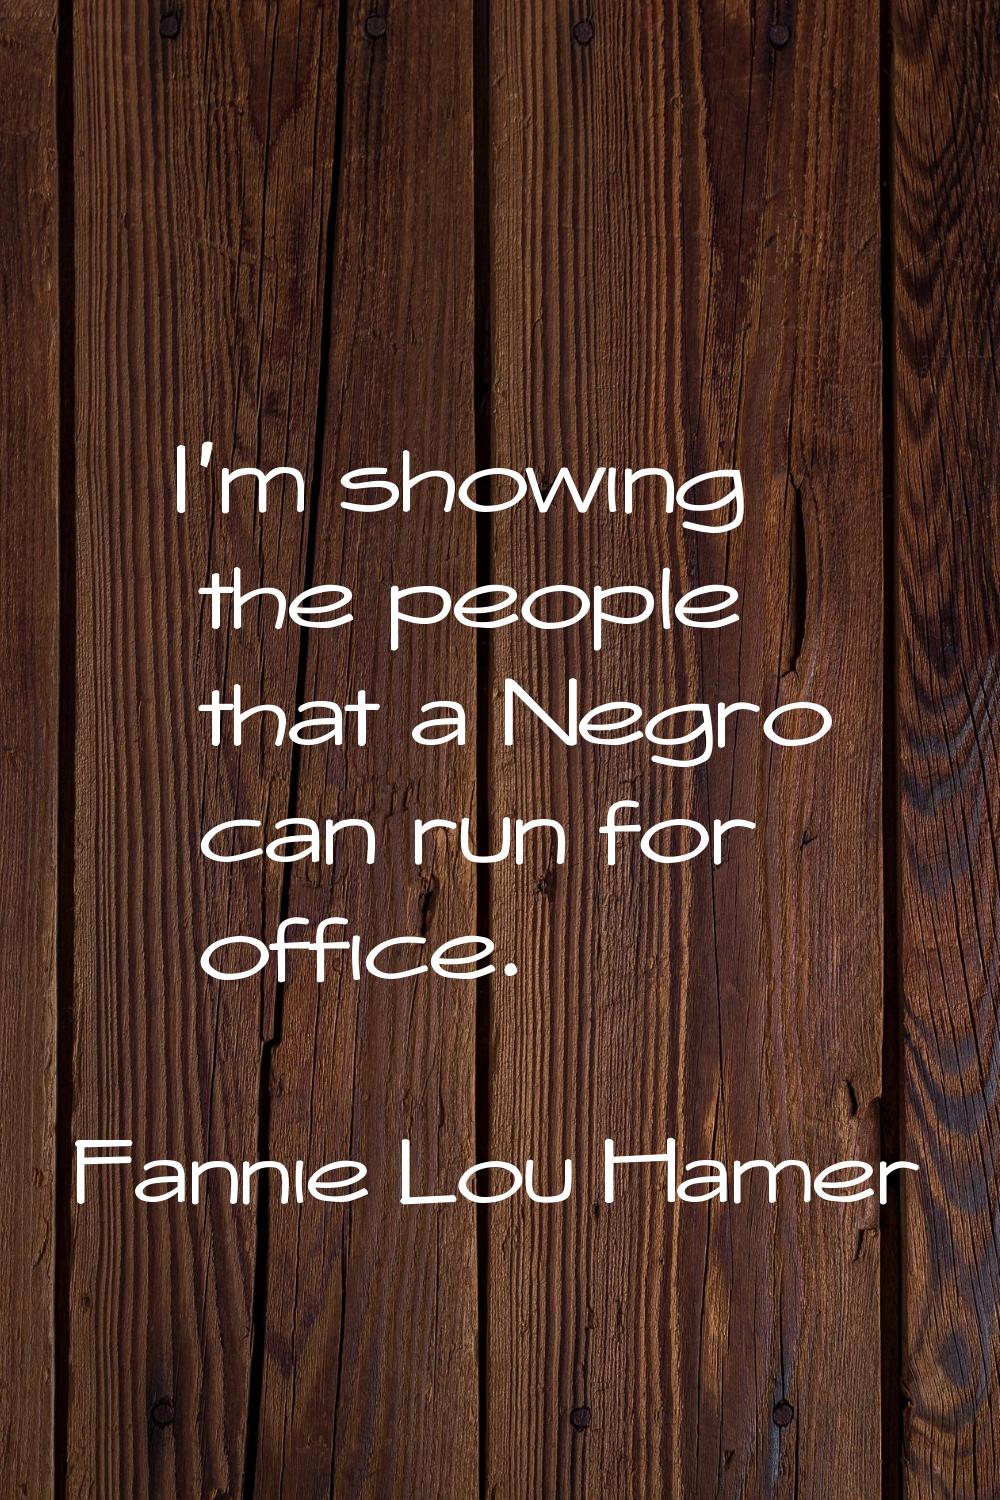 I'm showing the people that a Negro can run for office.